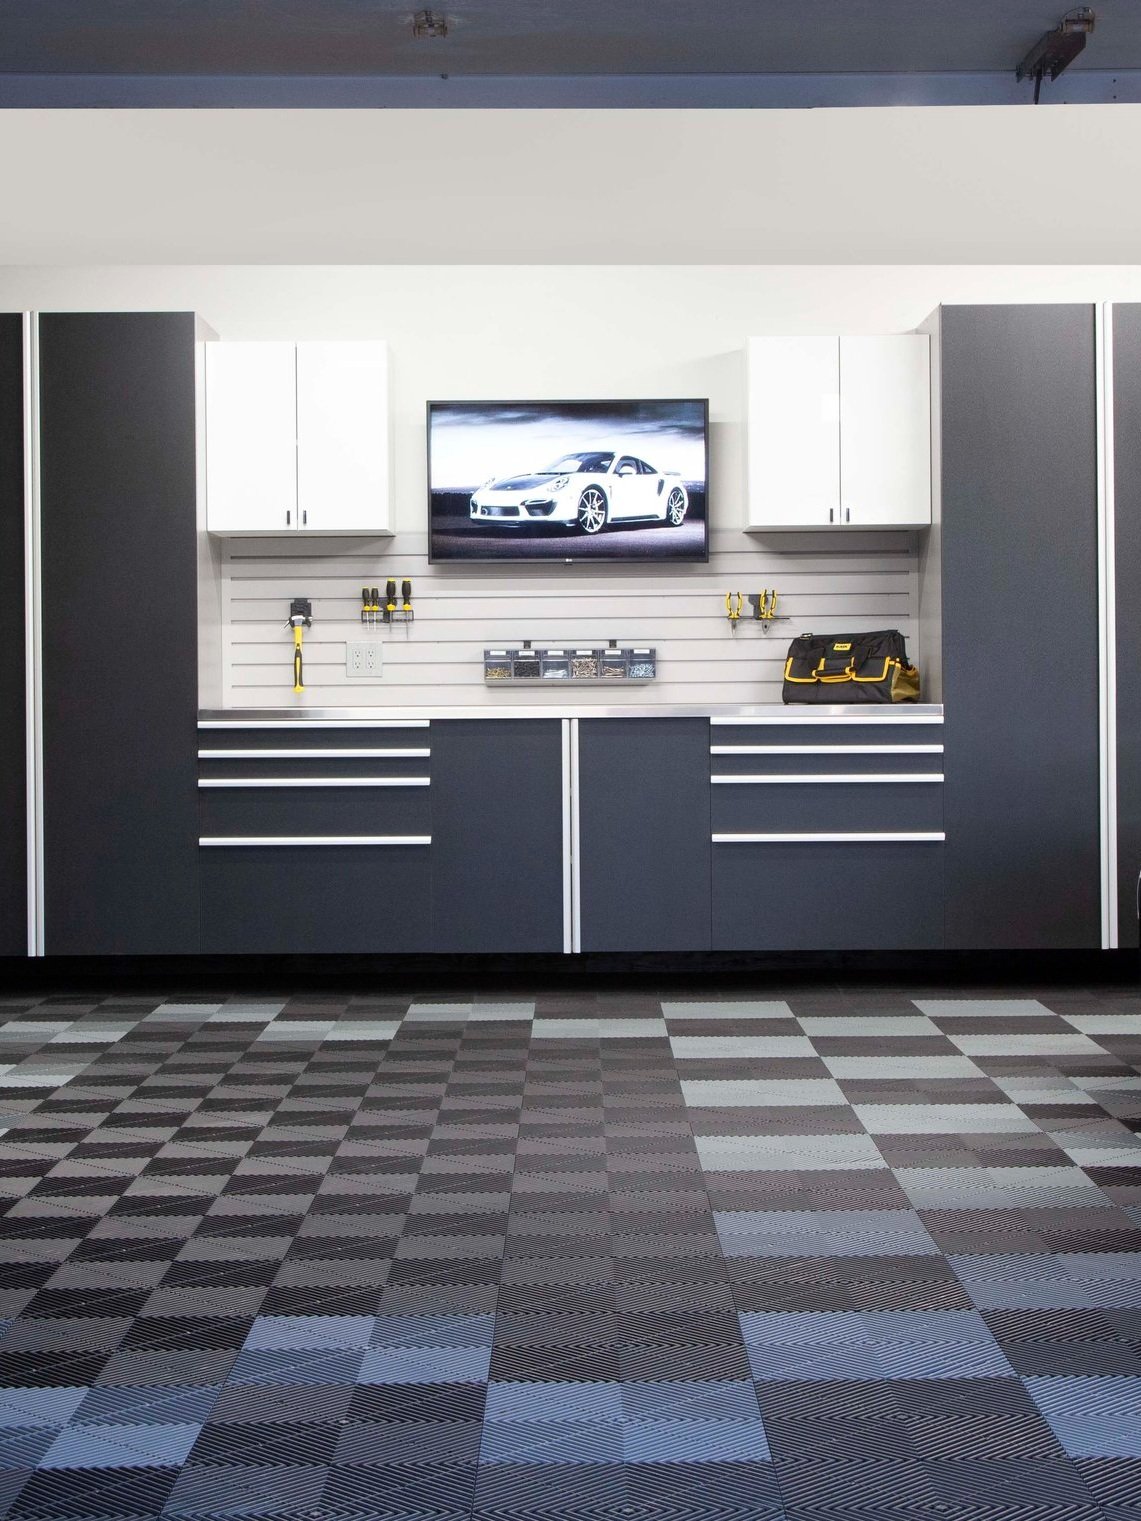 Basalt+Cabinets+Straight+with+Car+Oct+2020.jpg